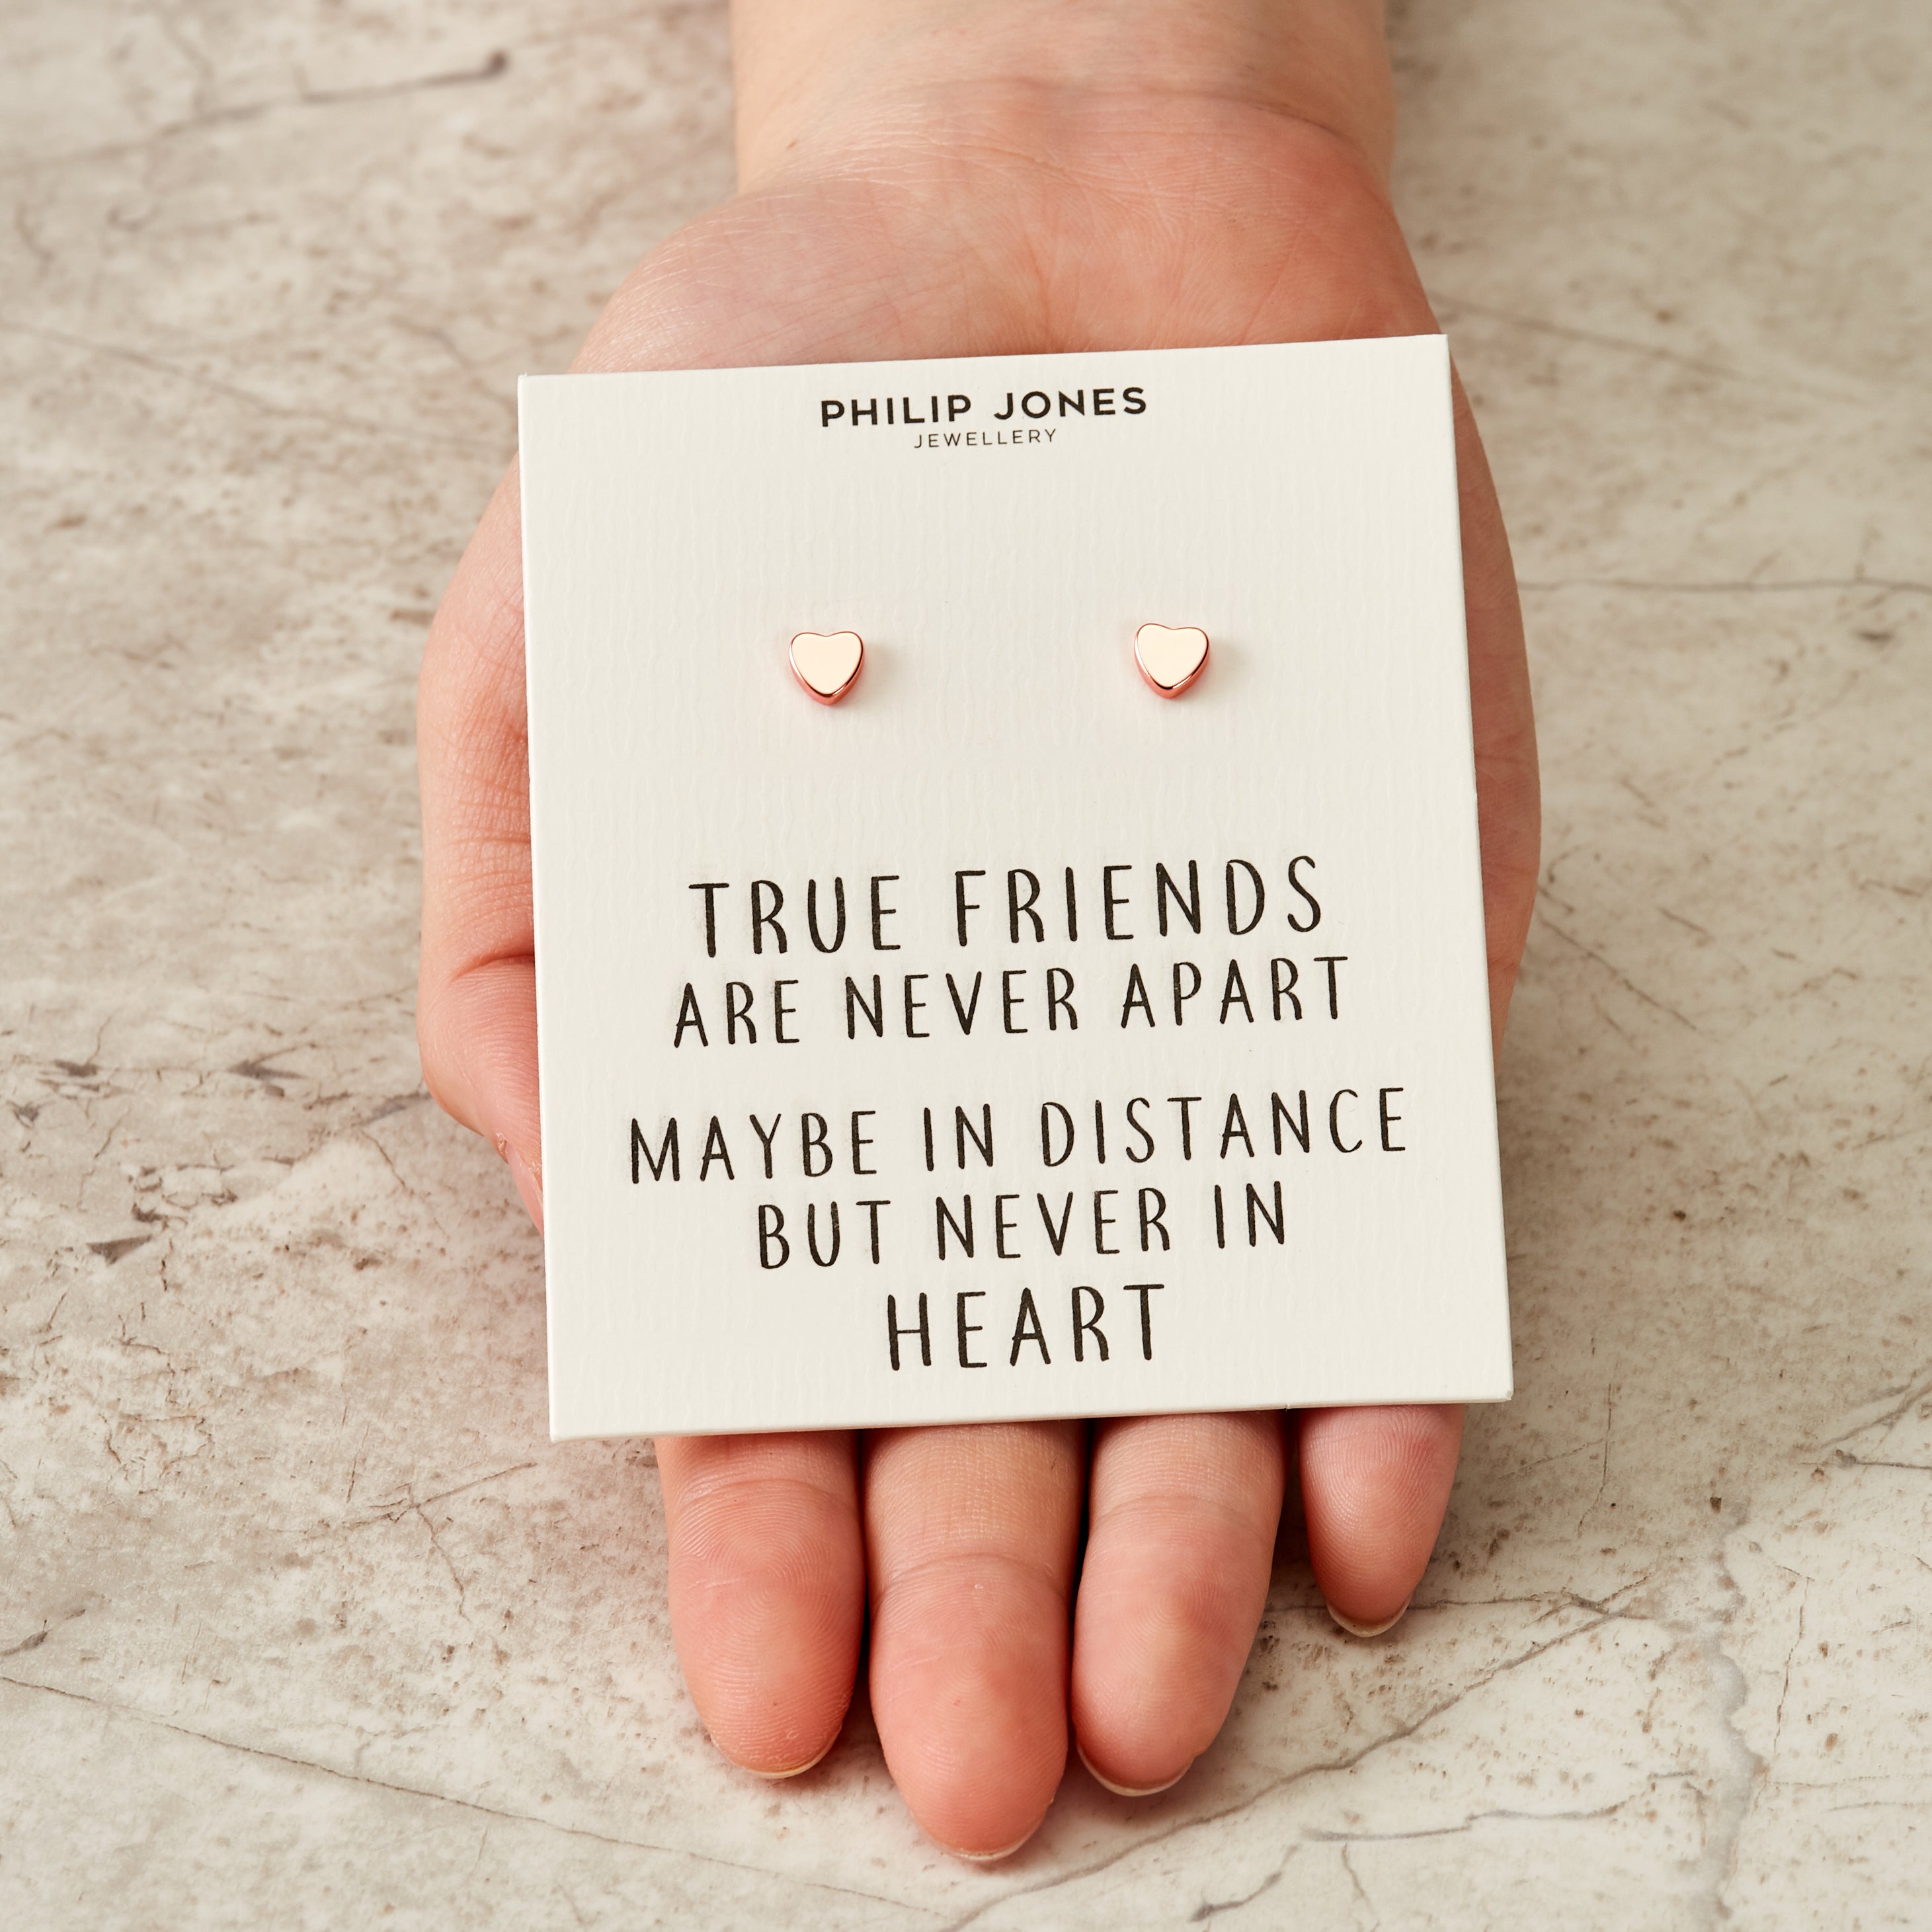 Rose Gold Plated Heart Stud Earrings with Quote Card